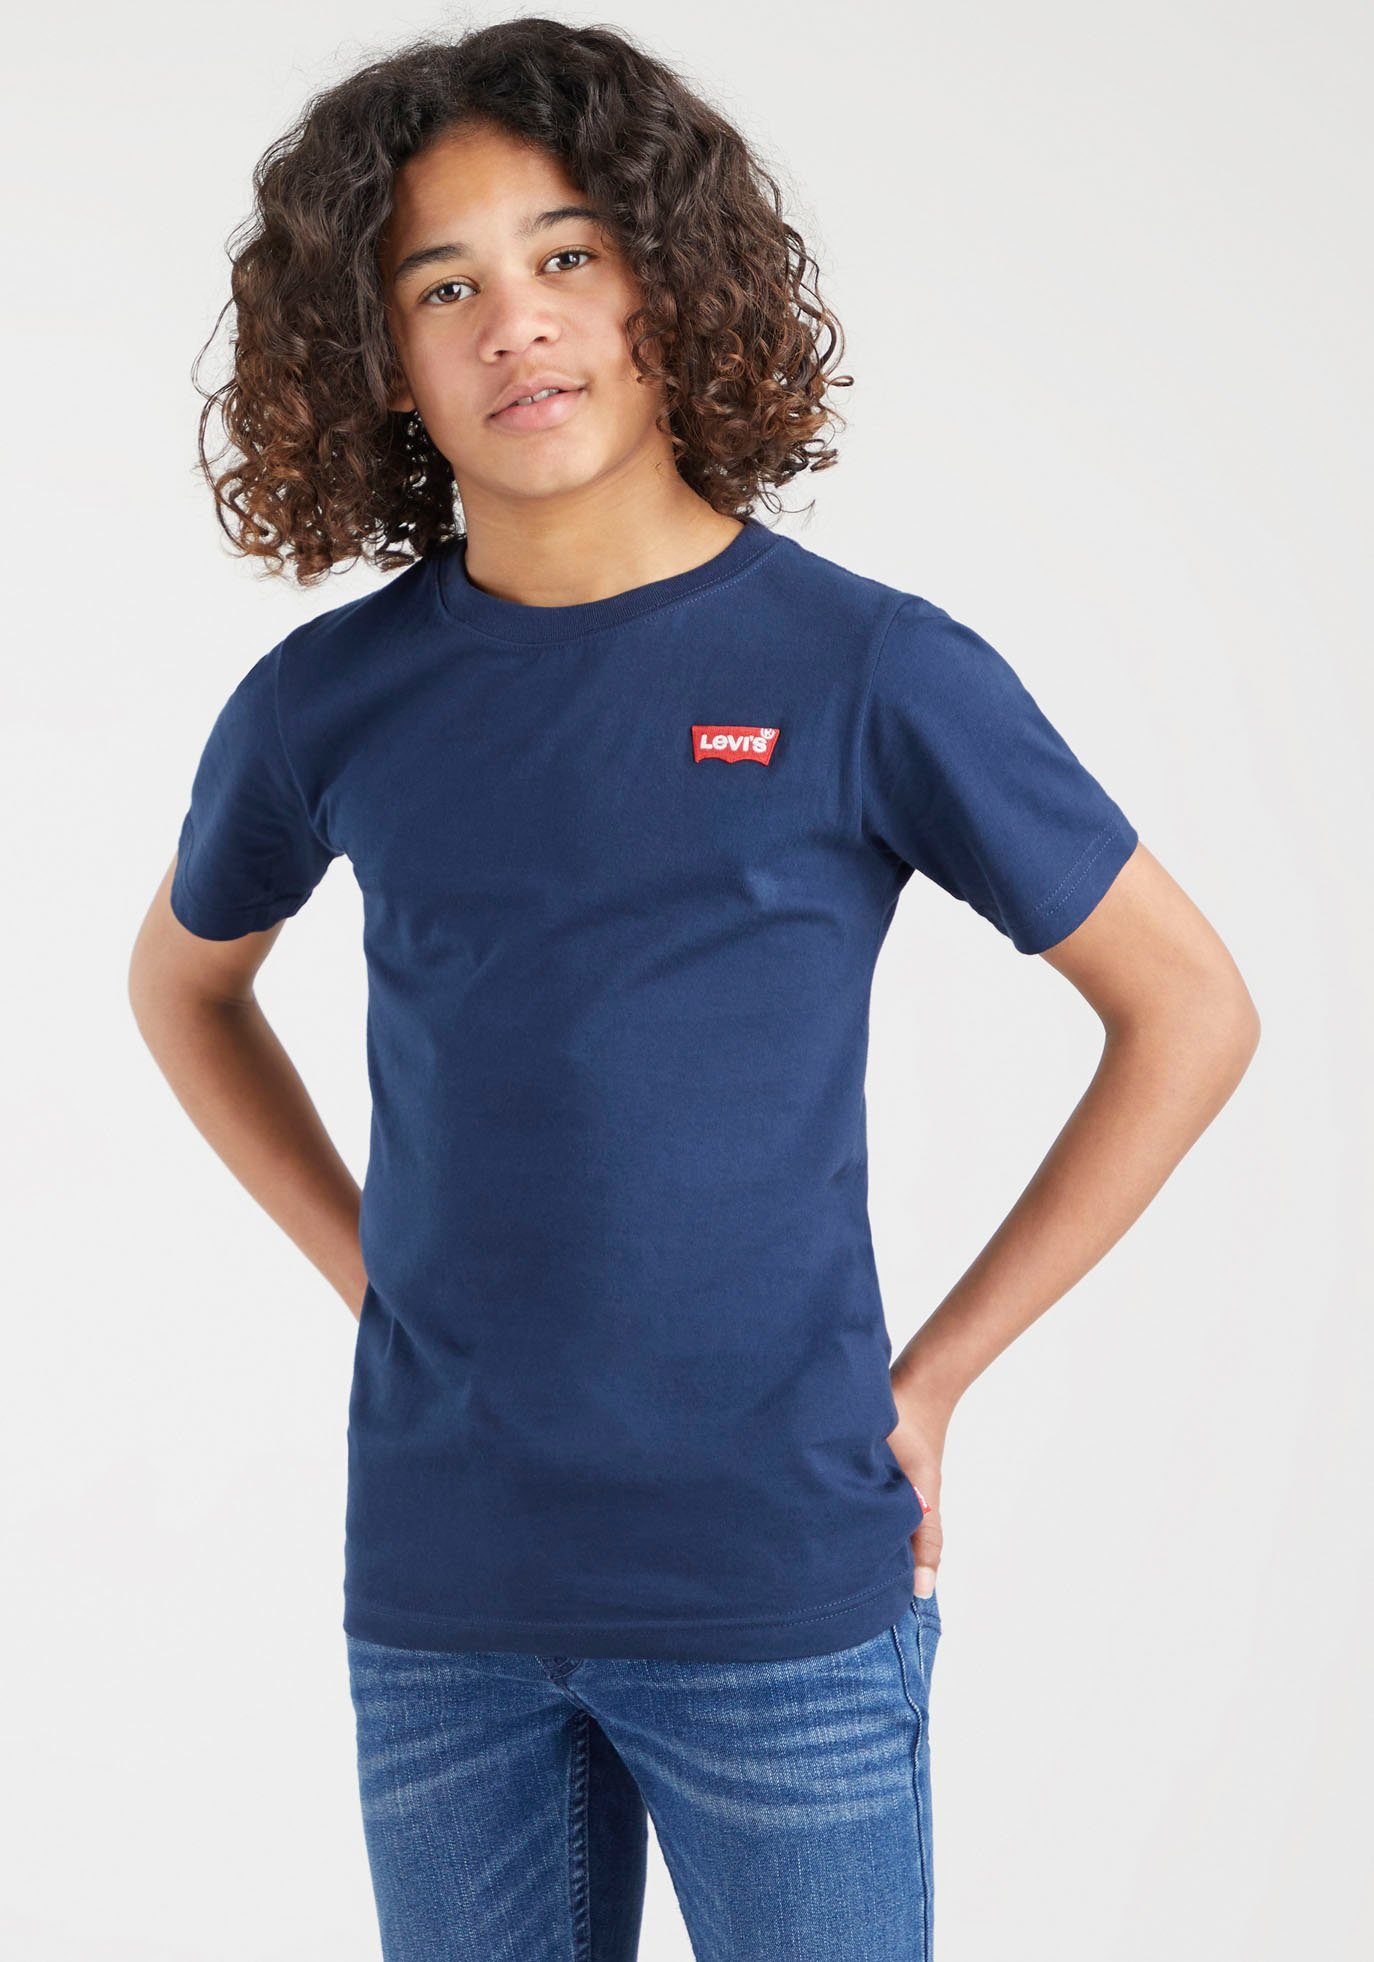 Levi's® Kids T-Shirt BATWING BOYS for navy HIT CHEST